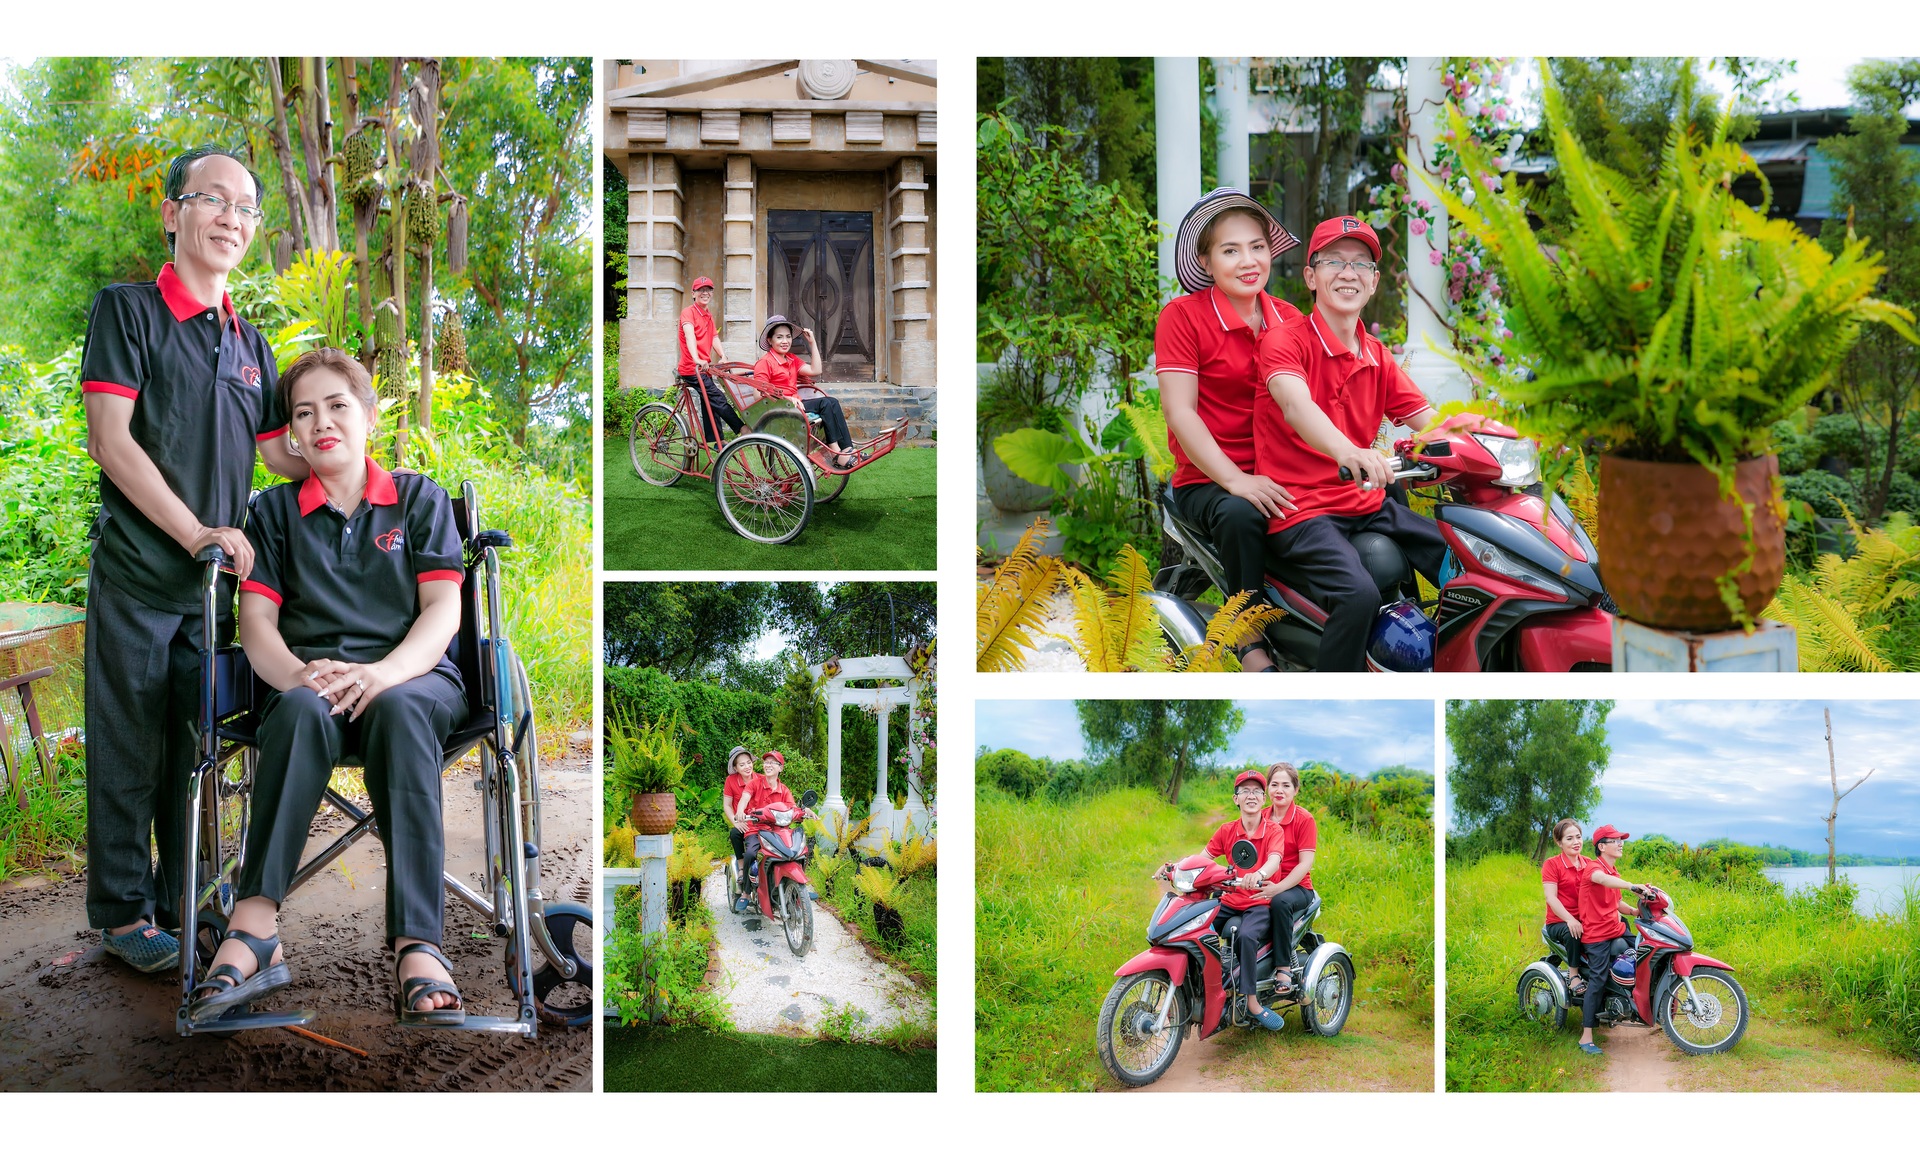 Group of friends in Saigon and dream wedding photos for people with disabilities - 8